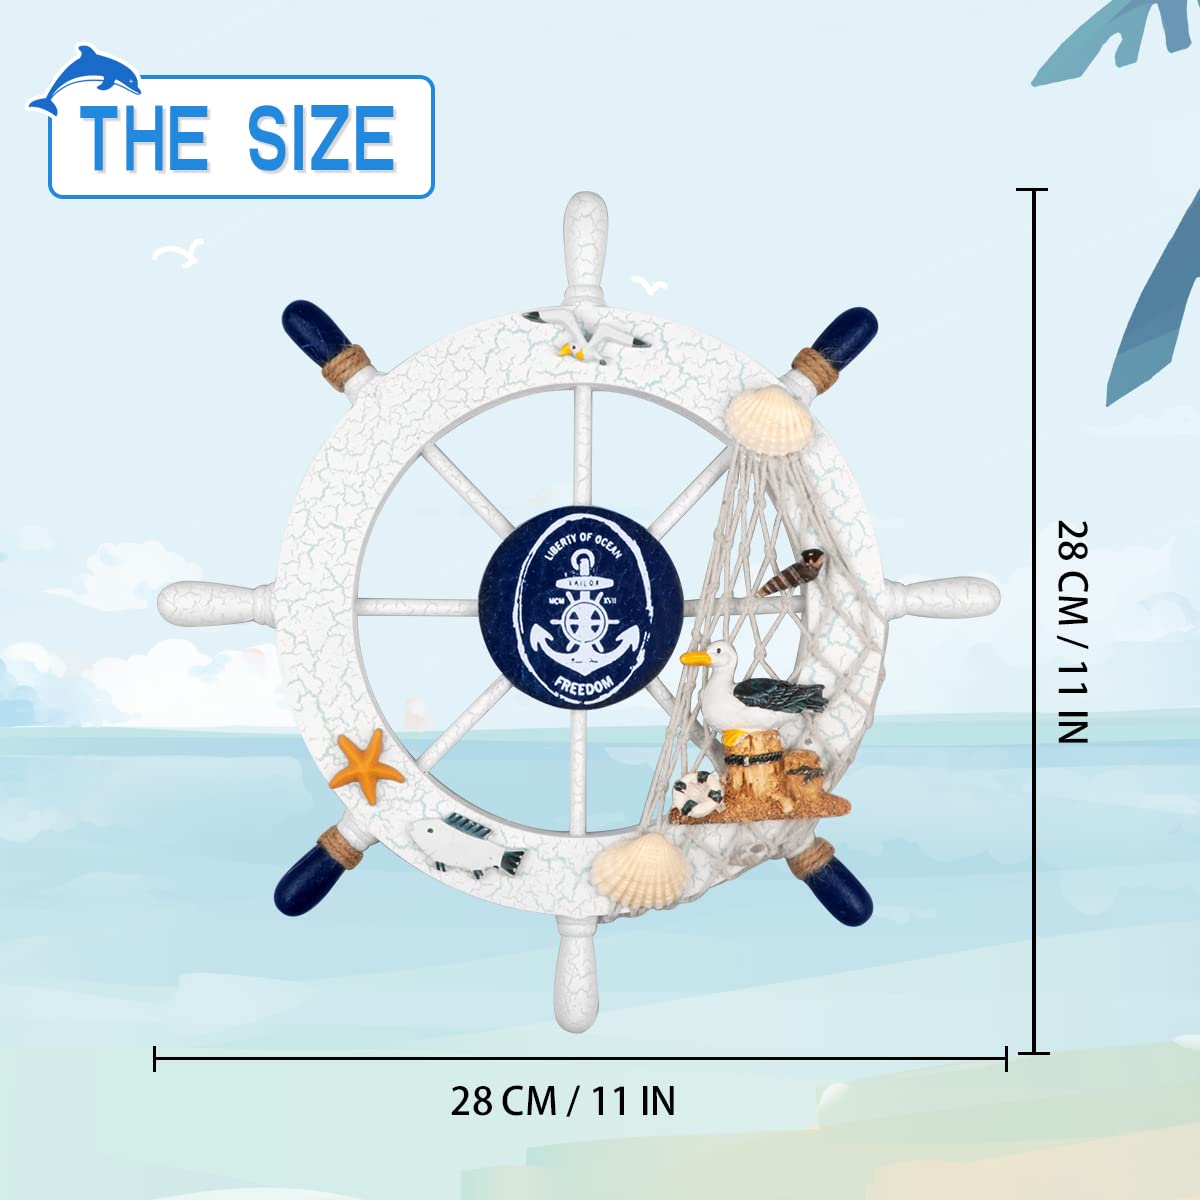 2 Pack 11" Nautical Beach Wooden Ship Wheel and 11" Wooden Anchor with Rope Nautical Boat Steering Wheel Rudder Anchor Wall Art Decor Door Hanging Ornament Beach Theme Home Decoration(White&Blue)